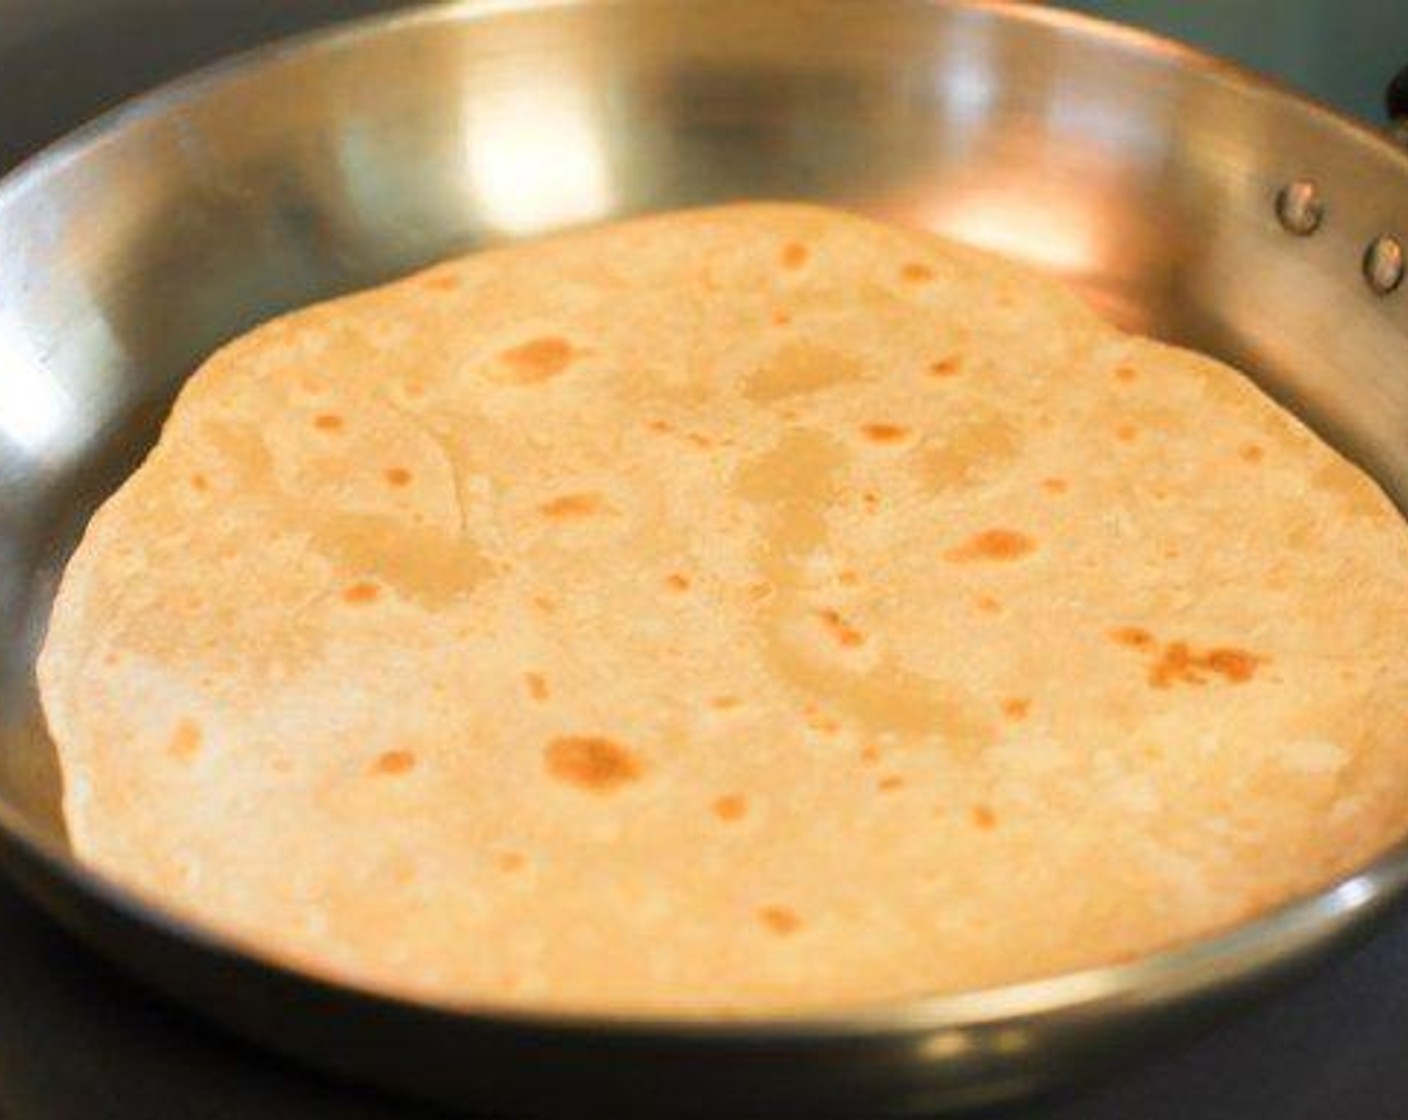 step 6 Preheat pan to medium to medium-high heat. Place a tortilla in the heated pan until golden brown on one side (about sixty to ninety seconds). Flip tortilla on other side to brown. Remove tortilla and place on a plate or in a container. Repeat for remaining tortillas.